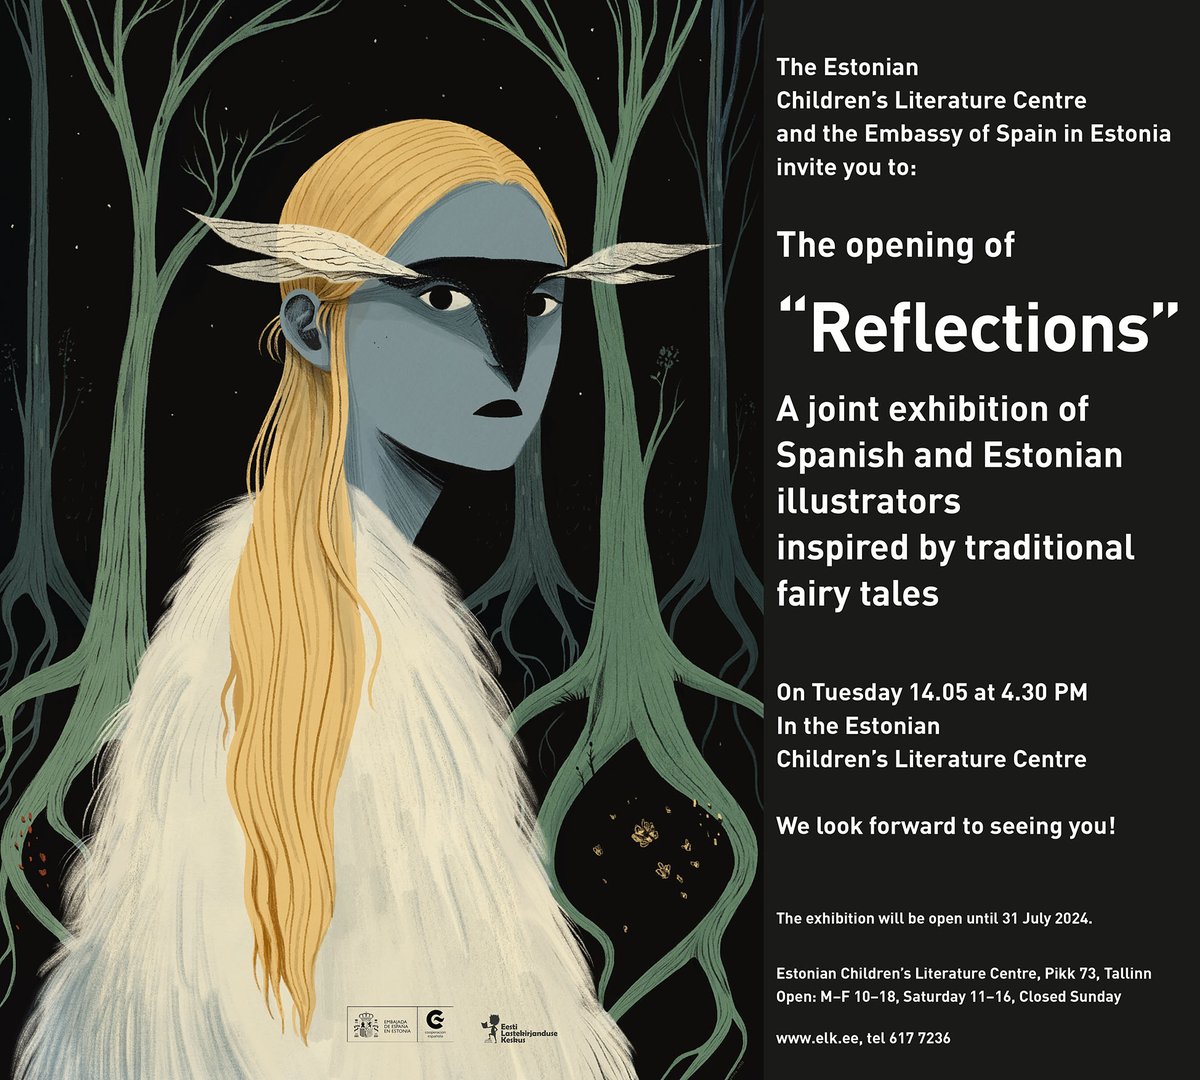 Reflections, an exhibition of Spanish and Estonian illustrators inspired by traditional fairy tales, opened on Tuesday 14 at the Estonian Children's Literature Center in Tallinn. Thanks to @lauraperezgr @en_estonia My contributions, inspired by the golden age of illustration.